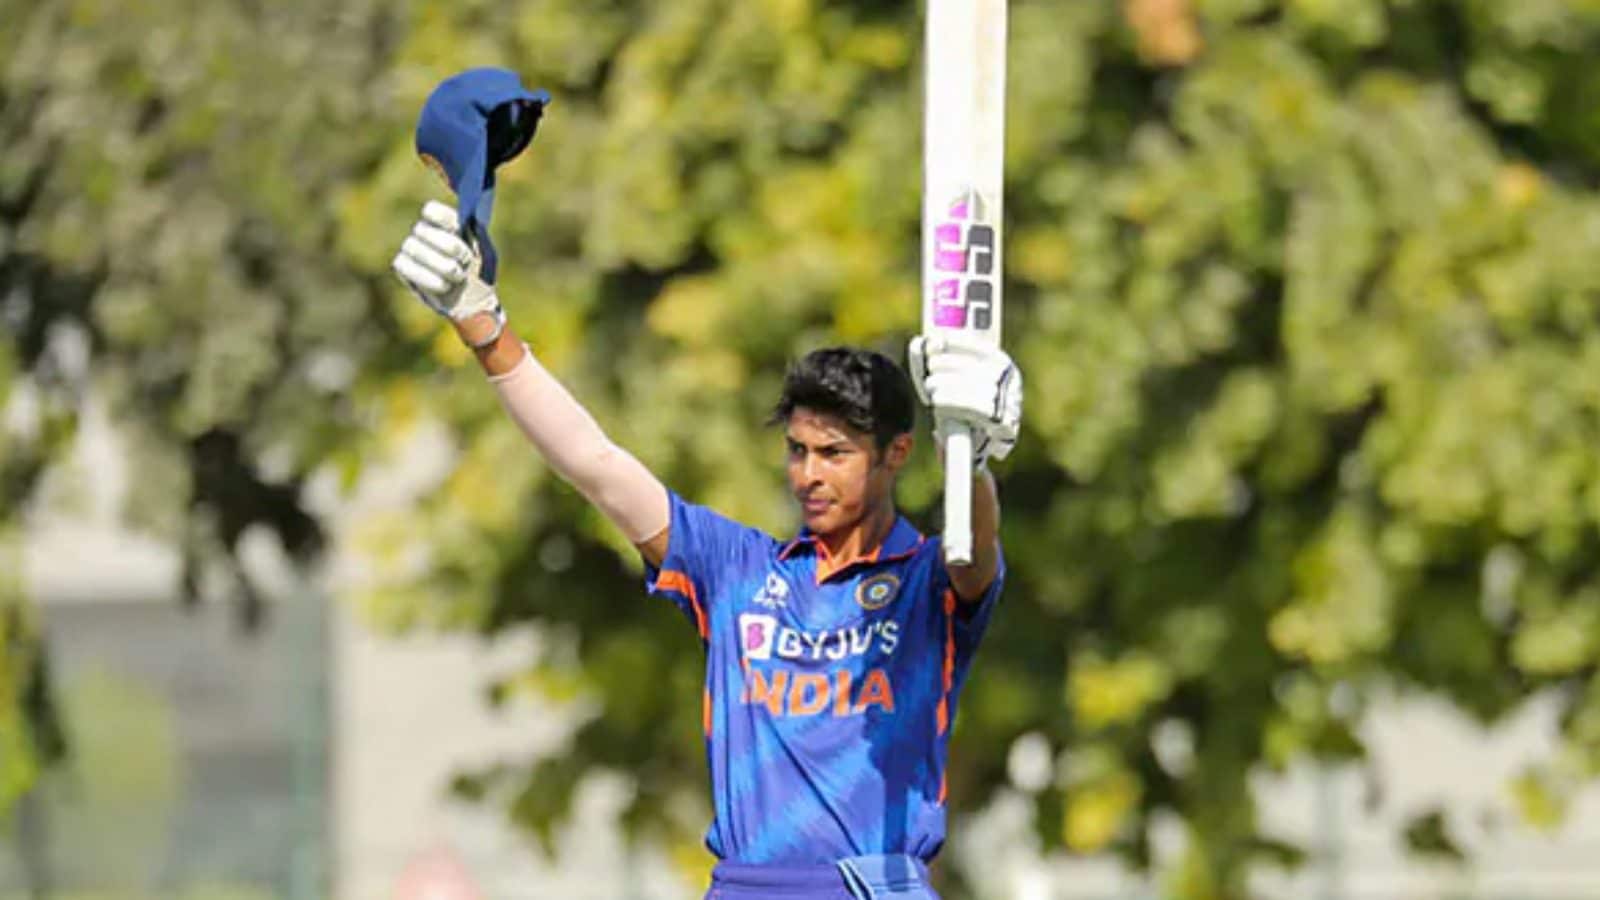 IND U-19 vs IRE U-19 Dream11 Team Prediction: Check Captain, Vice-Captain, and Probable Playing XIs ICC U-19 World Cup 2021/22 match, January 19, 6:30 pm IST